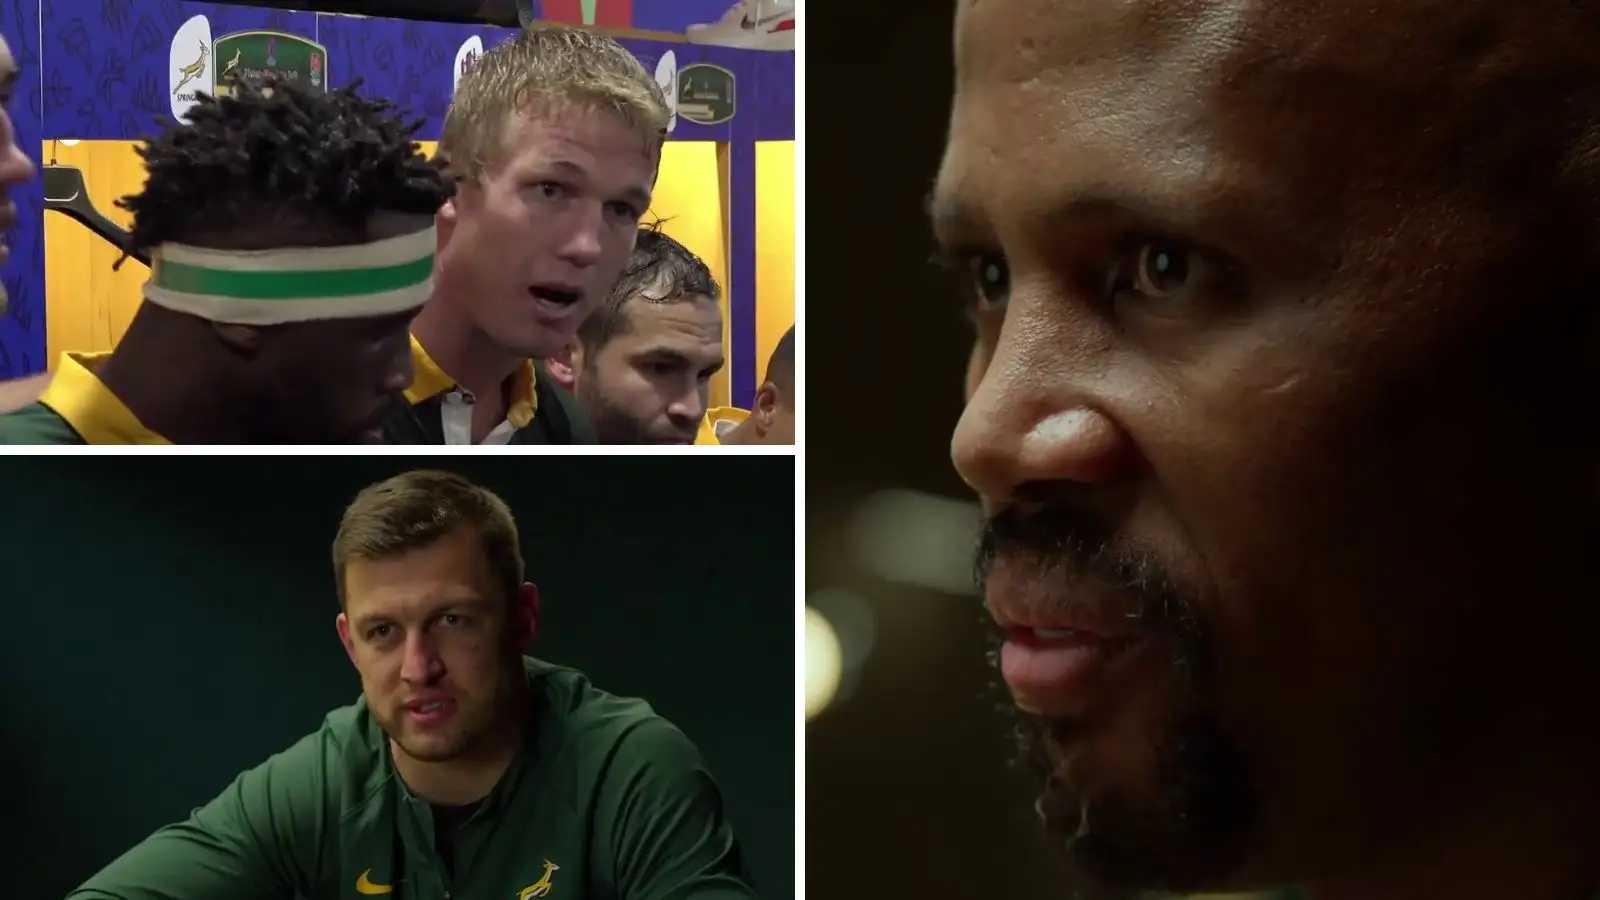 Screenshots from the Chasing the Sun 2 documentary featuring Springboks Pieter-Steph du Toit, Handre Pollard and Mzwandile Stick during the Rugby World Cup.